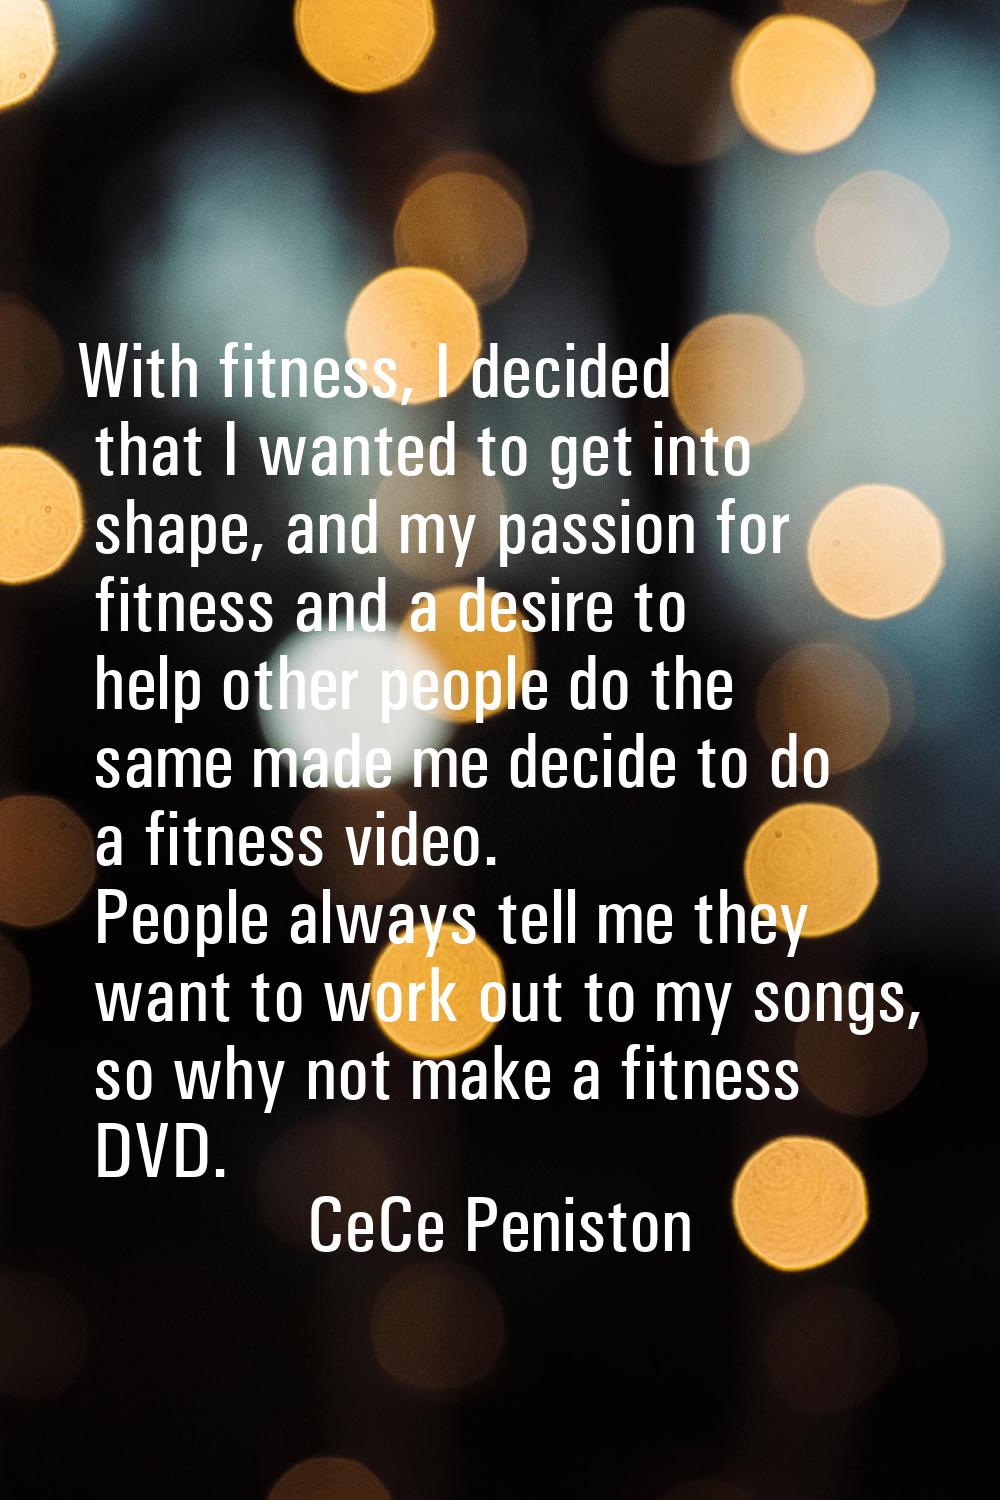 With fitness, I decided that I wanted to get into shape, and my passion for fitness and a desire to